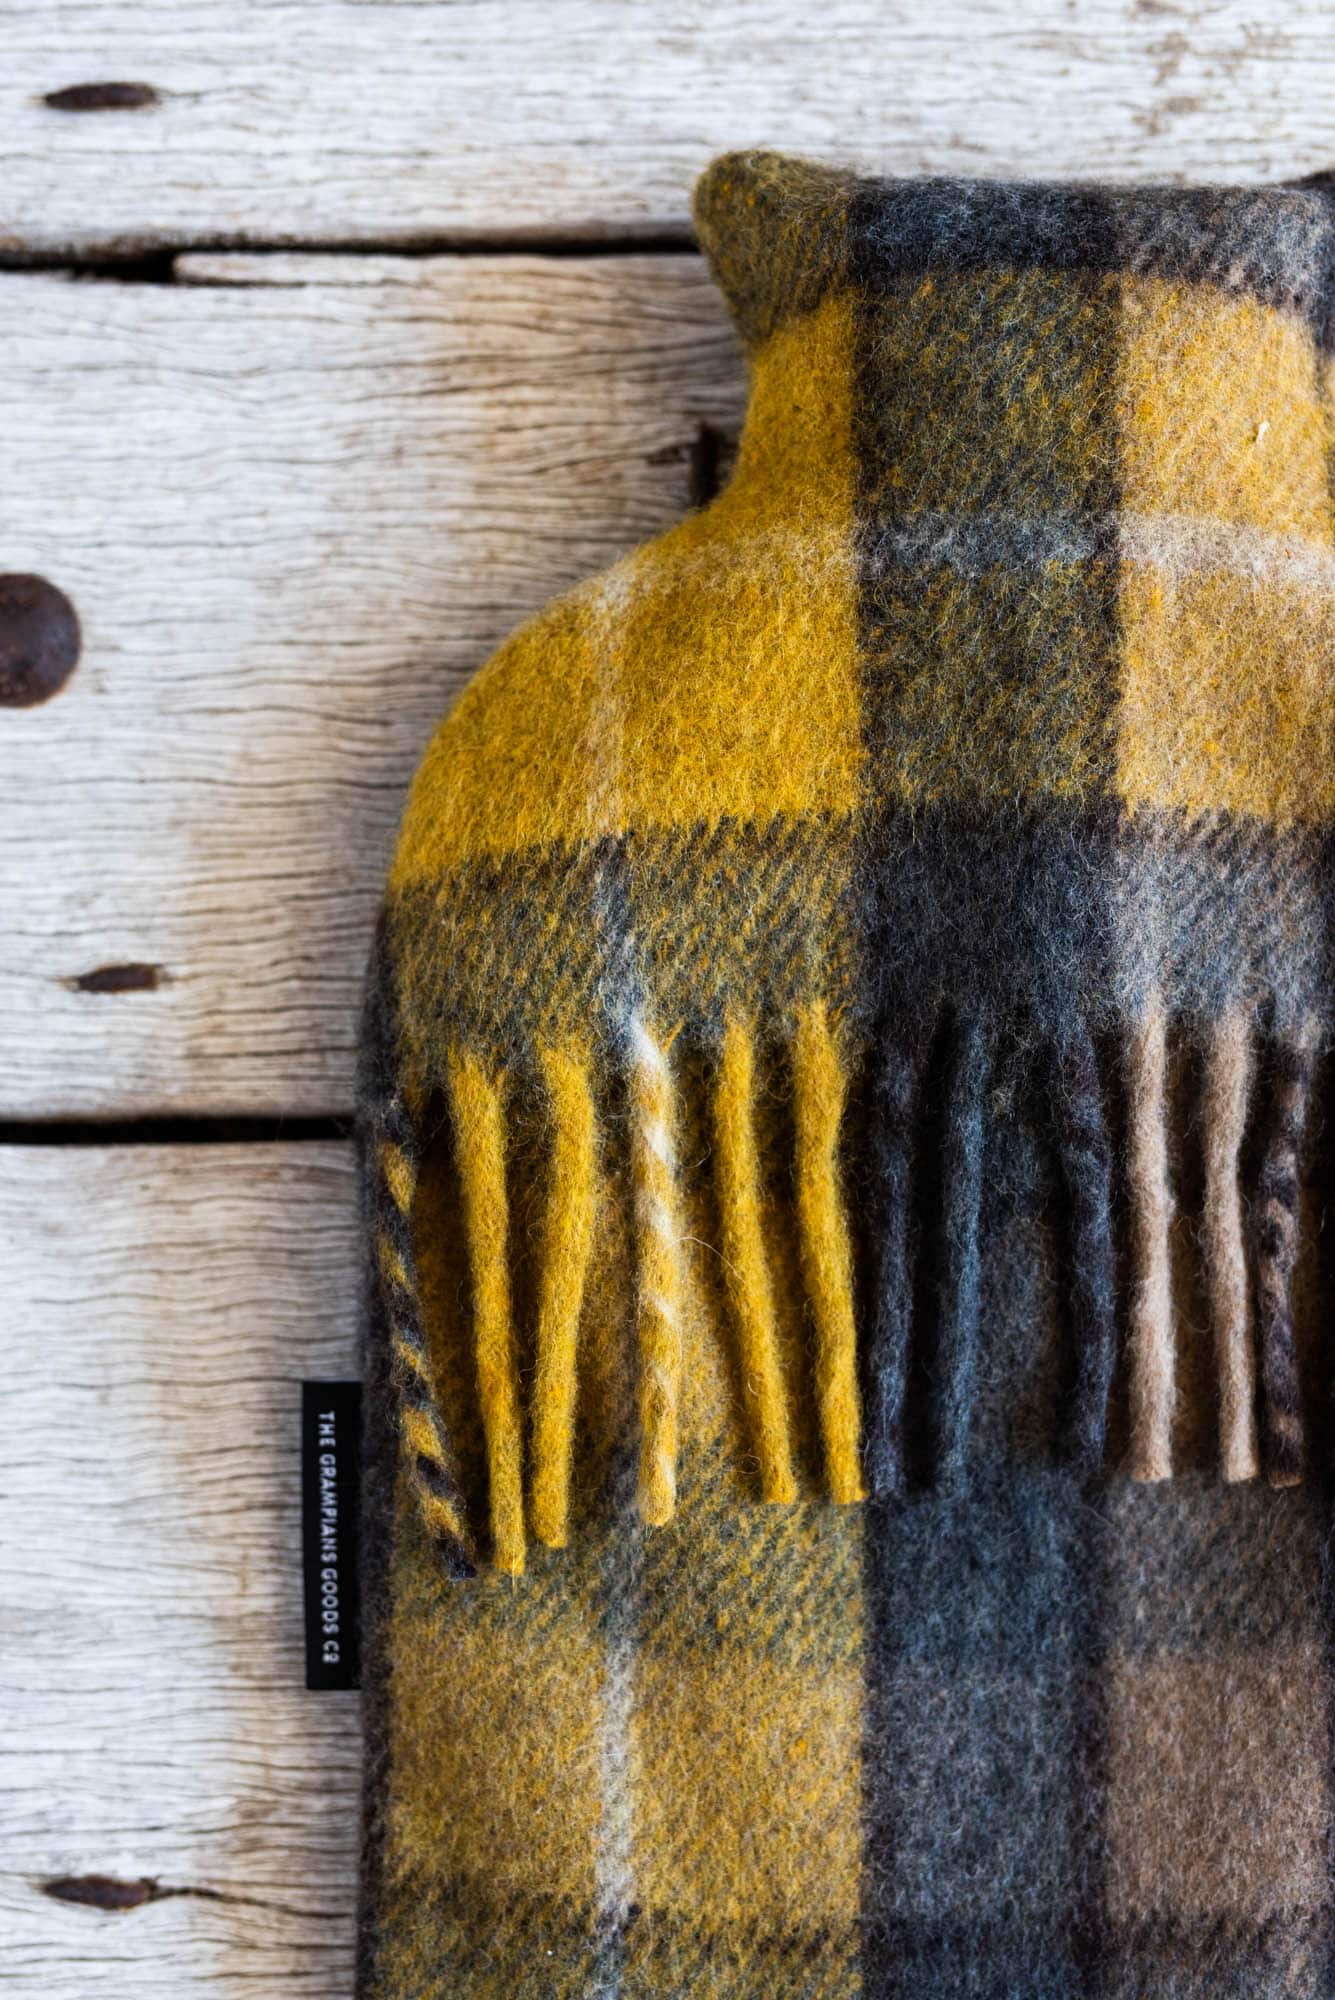 Recycled Wool Tartan Hot Water Bottle Covers